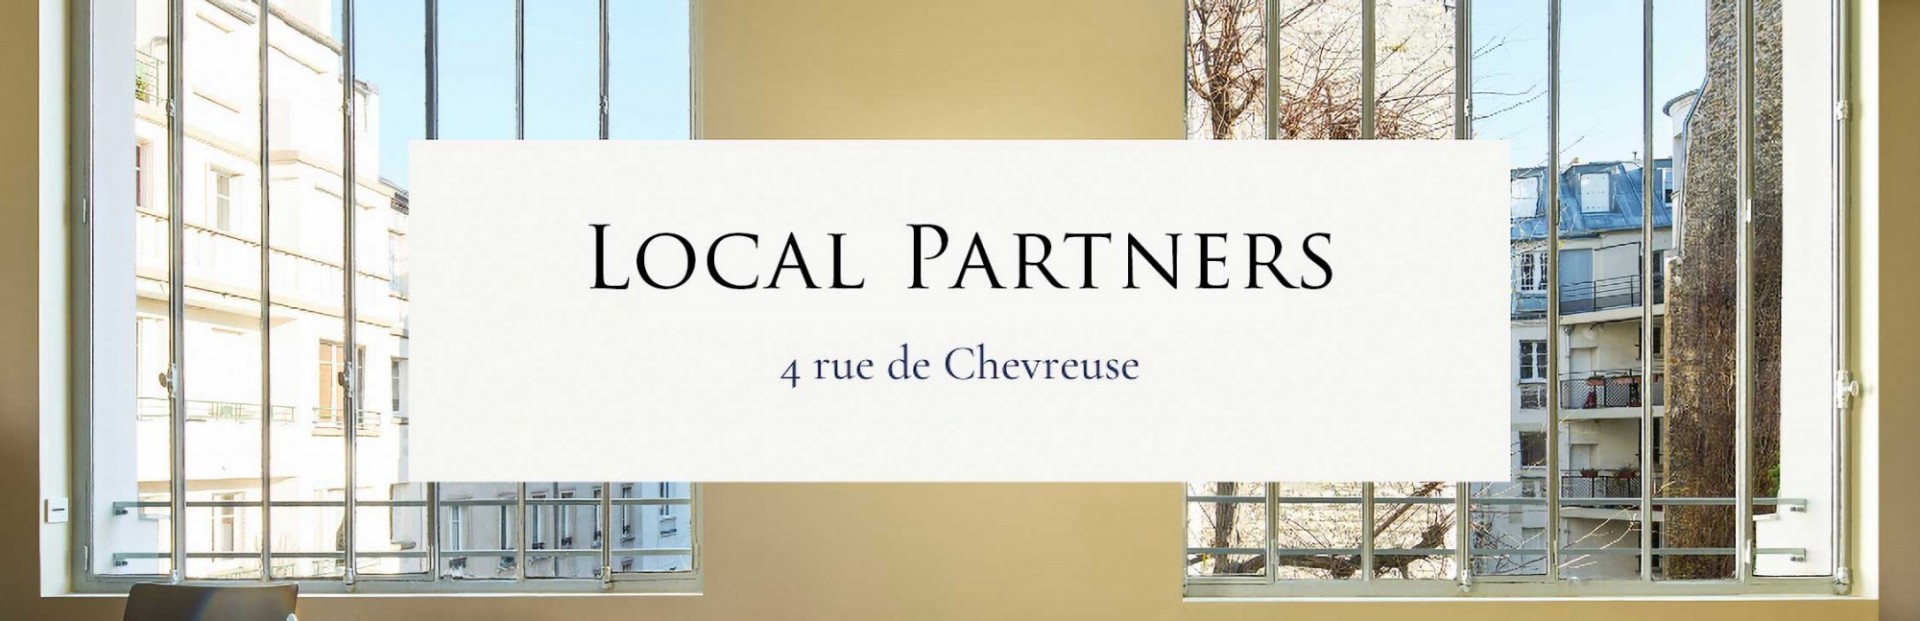 Local Partners